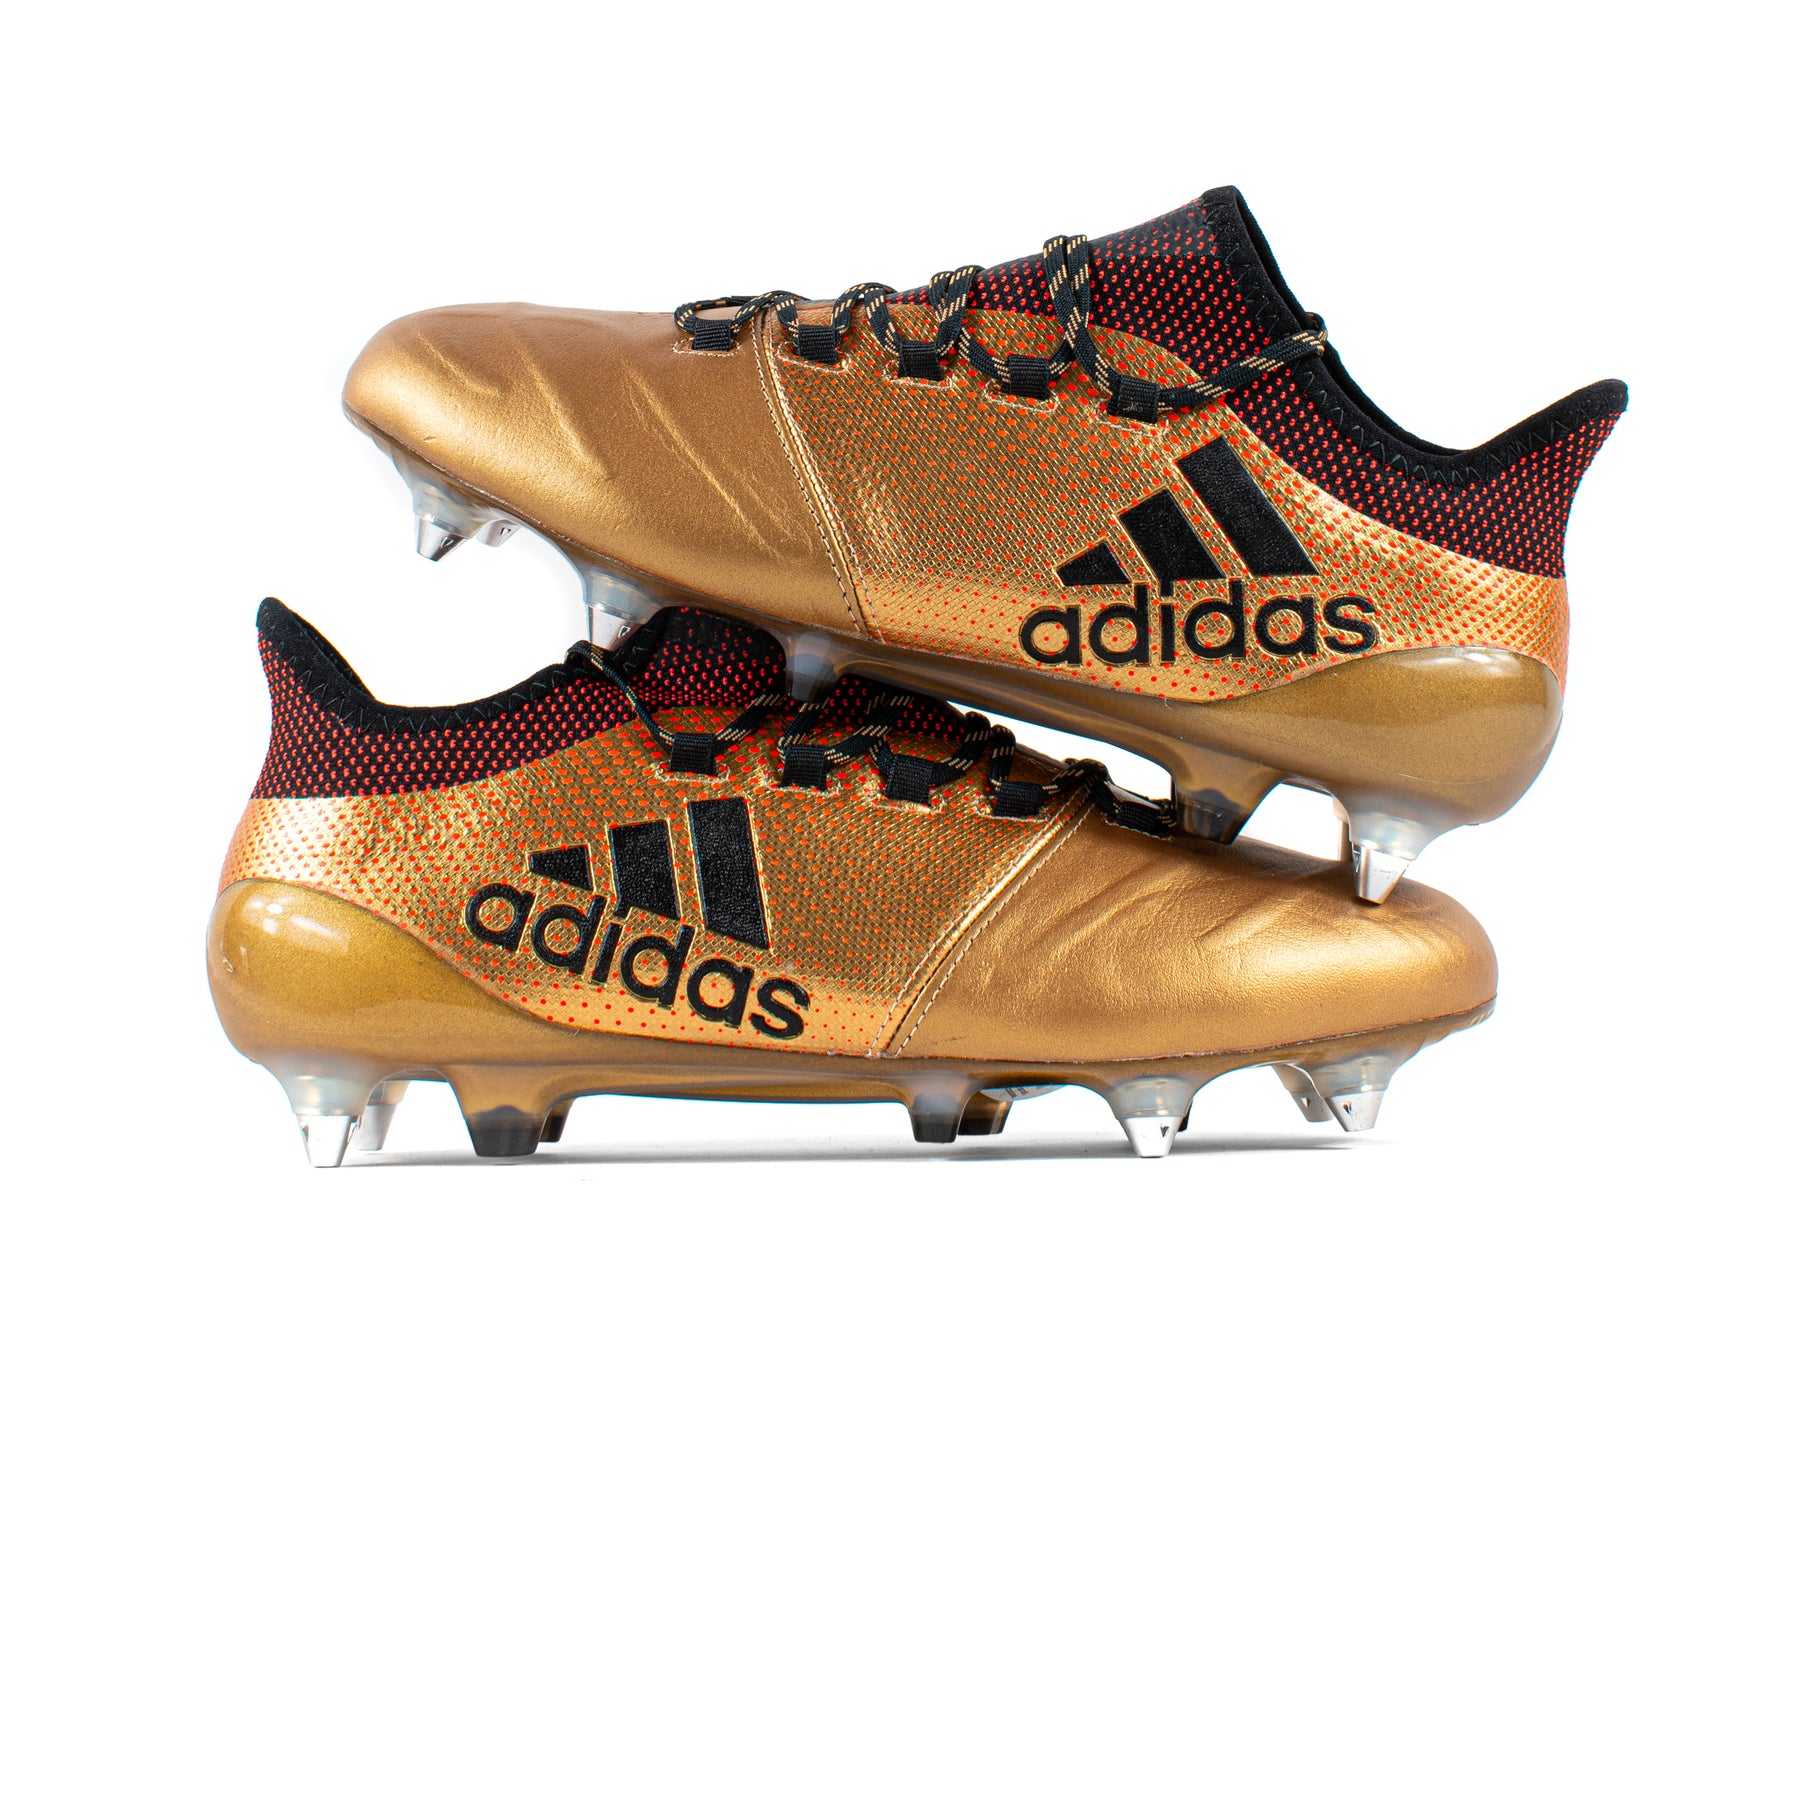 Adidas X17.1 Leather Gold SG Classic Soccer